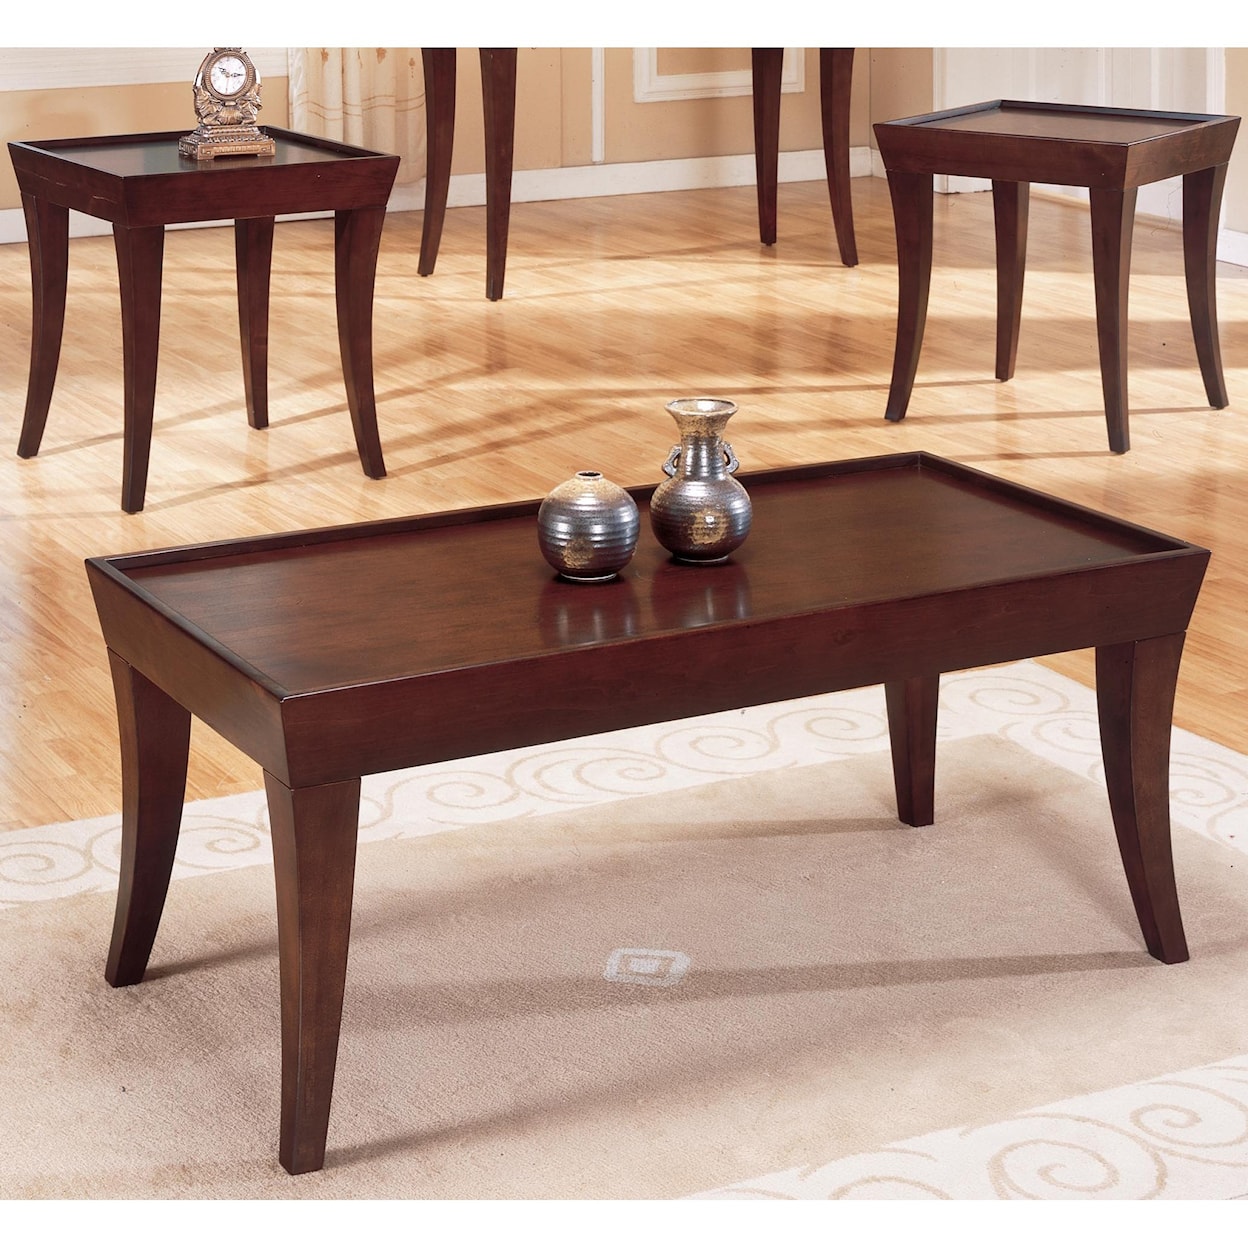 Homelegance Furniture Zen Casual Occasional Table Group